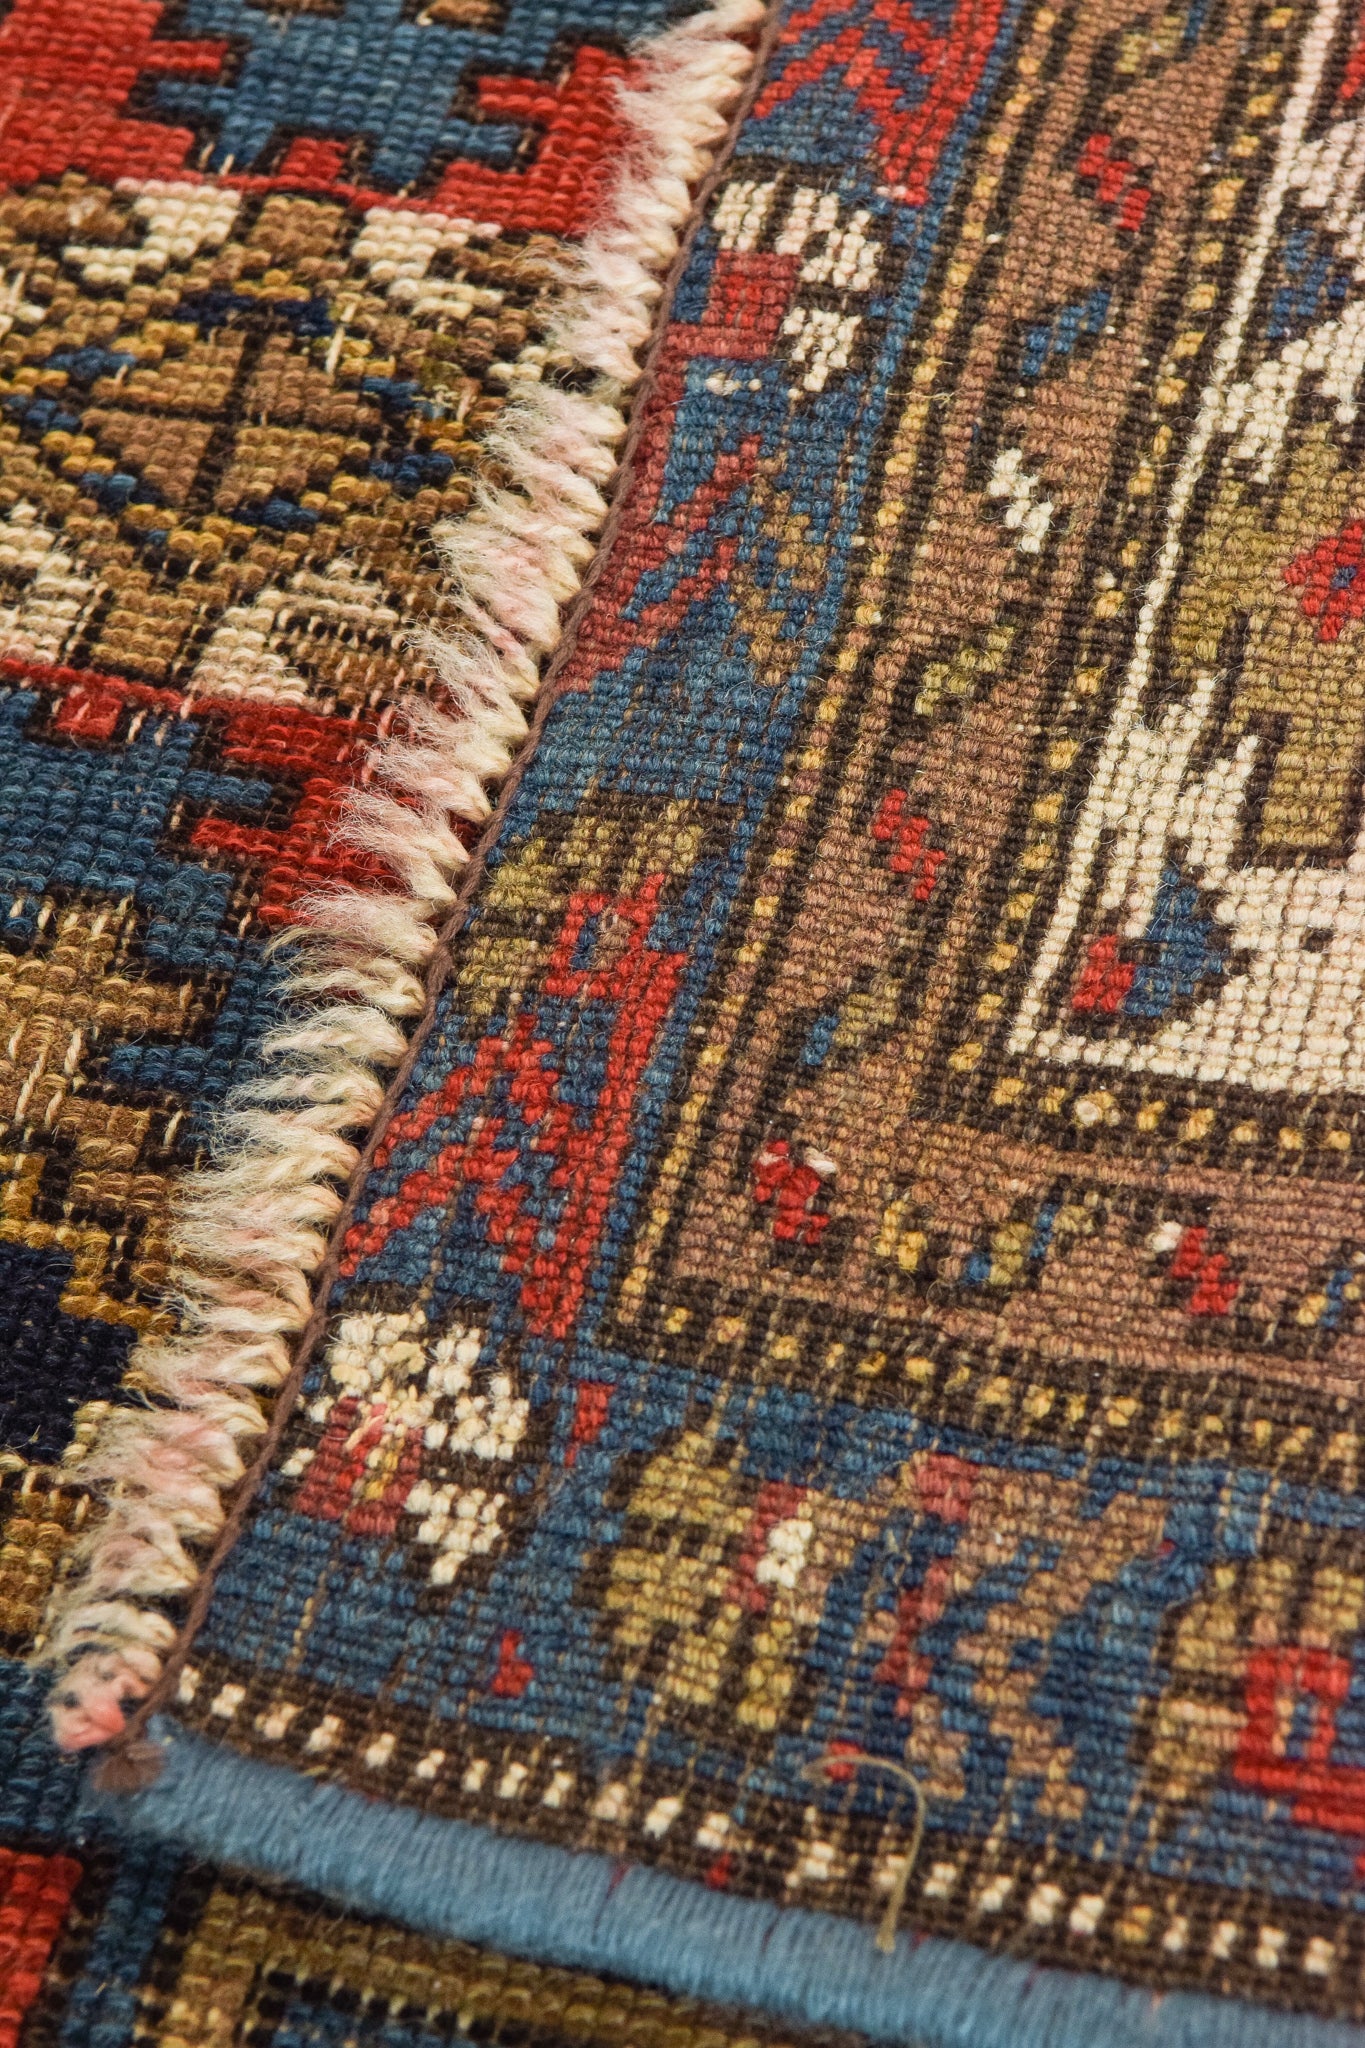 Handwoven Blue Ground Persian Rug with Bird-like Figures